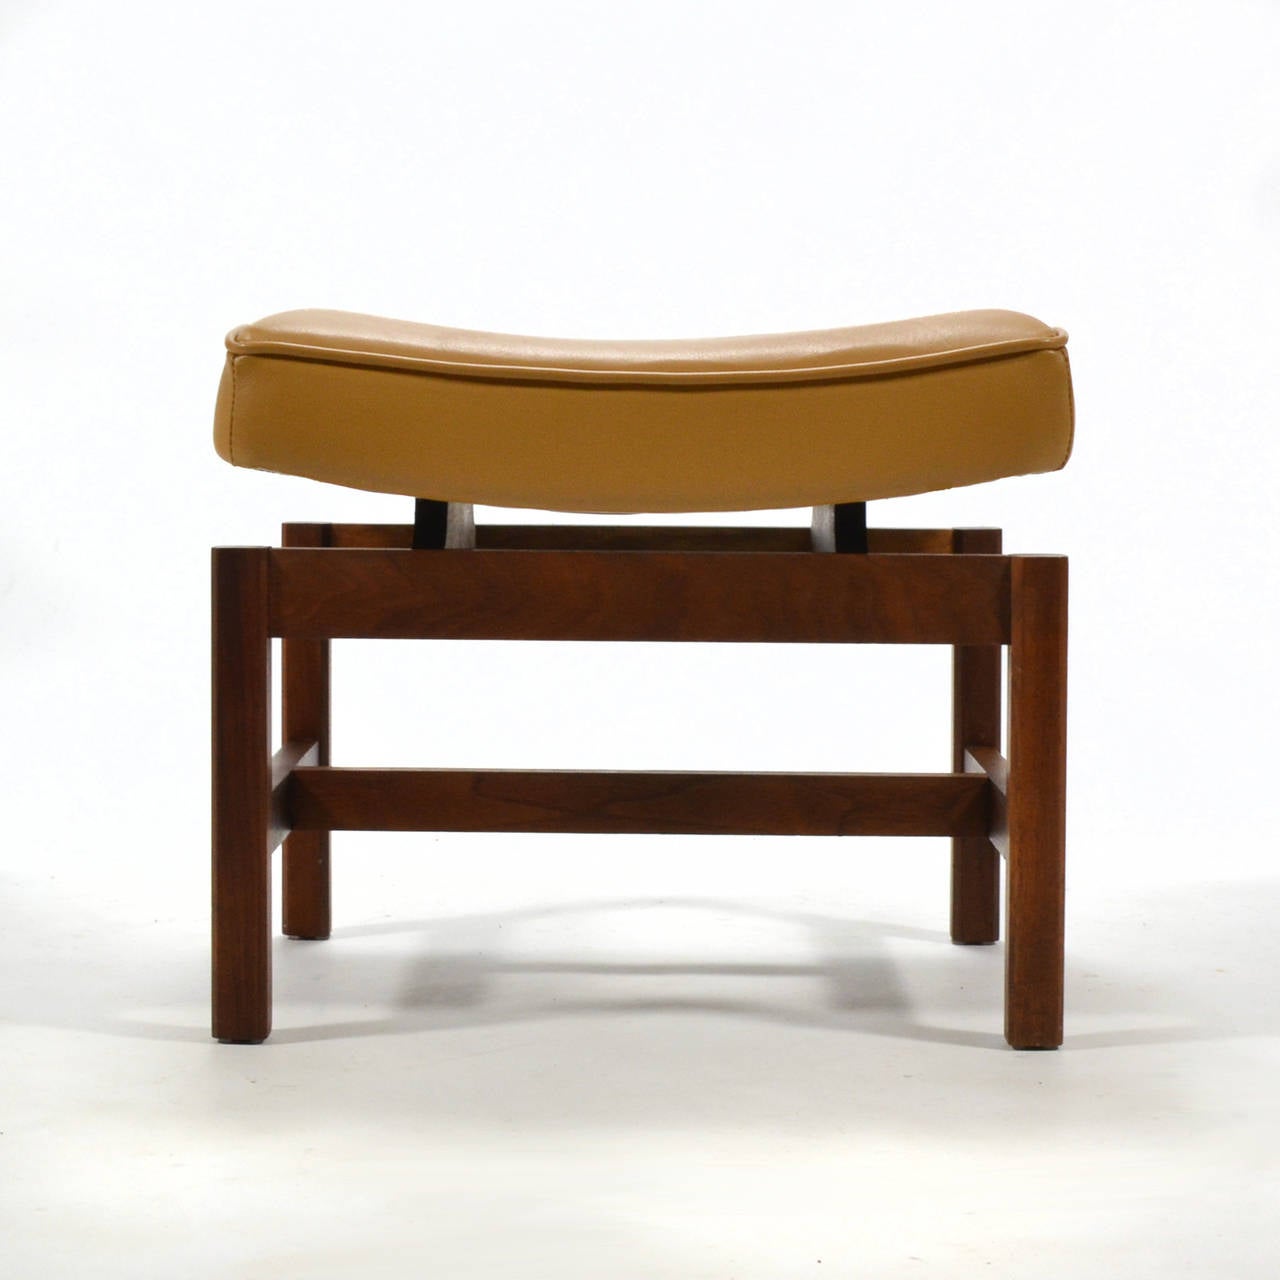 A bench, a stool, an ottoman... this delightful little piece by Jens Risom serves many functions. With a base of rich walnut and a top upholstered in caramel leather, it is lovely and useful. The 